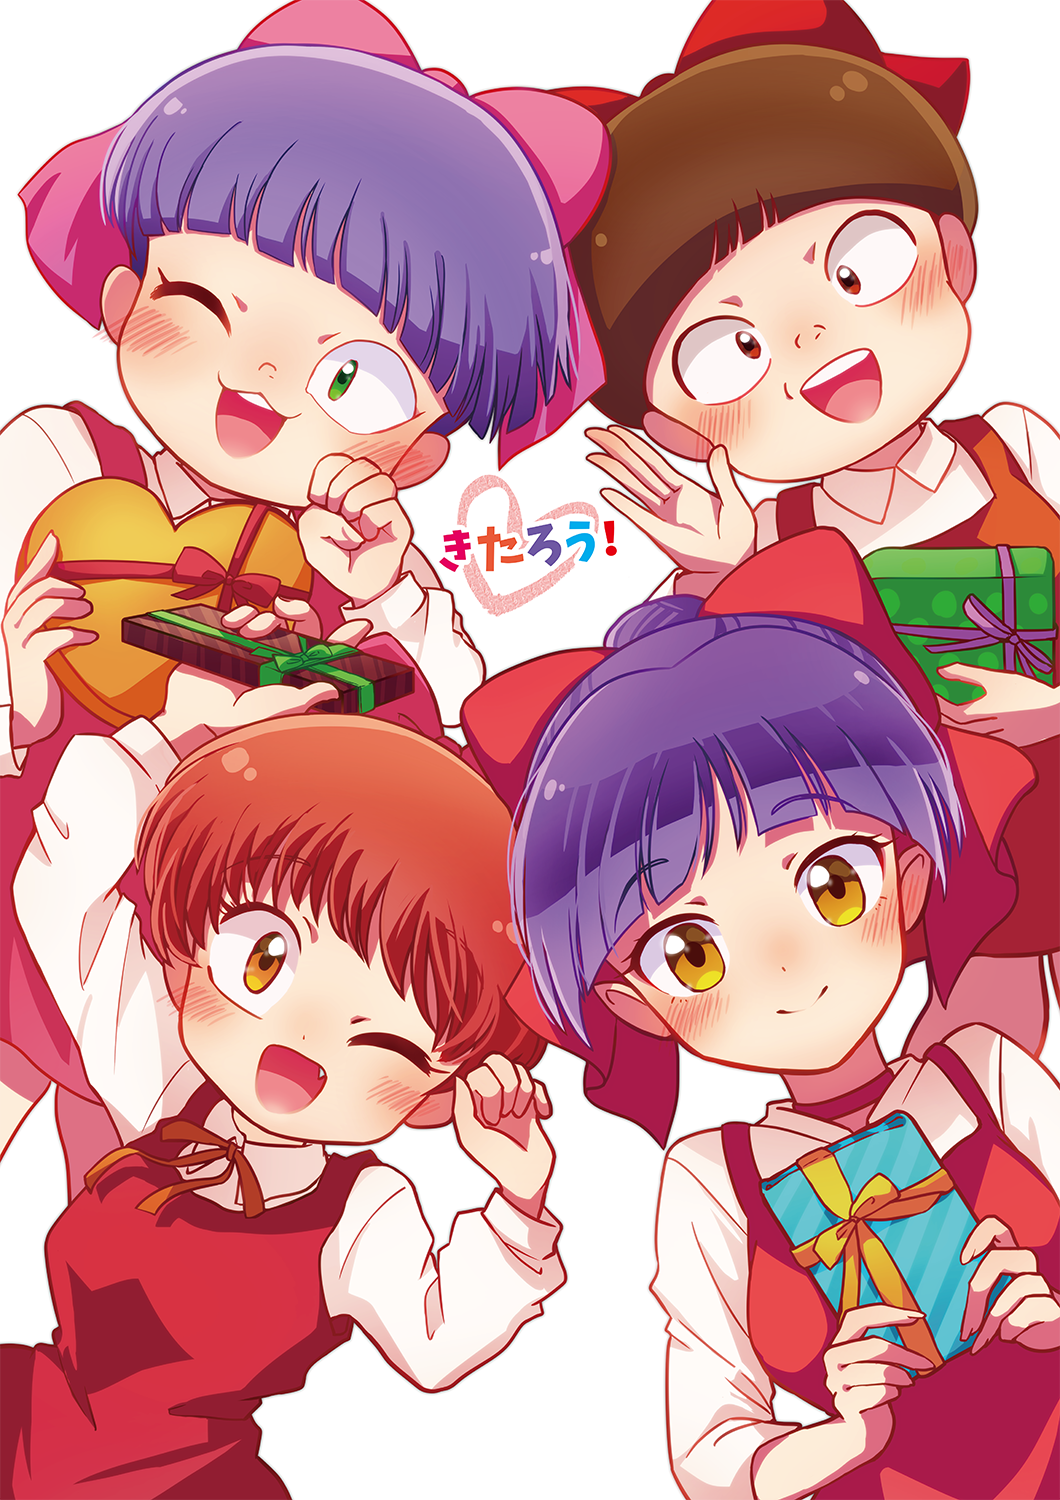 4girls ;d bangs blush bow brown_hair choker closed_mouth commentary_request eyebrows_visible_through_hair fang gegege_no_kitarou gift green_eyes hair_bow highres himeno_ktnk holding holding_gift long_sleeves looking_at_viewer multiple_girls nekomusume nekomusume_(gegege_no_kitarou_3) nekomusume_(gegege_no_kitarou_4) nekomusume_(gegege_no_kitarou_5) nekomusume_(gegege_no_kitarou_6) one_eye_closed open_mouth pink_bow purple_hair red_bow red_choker red_eyes redhead short_hair simple_background smile valentine white_background yellow_eyes